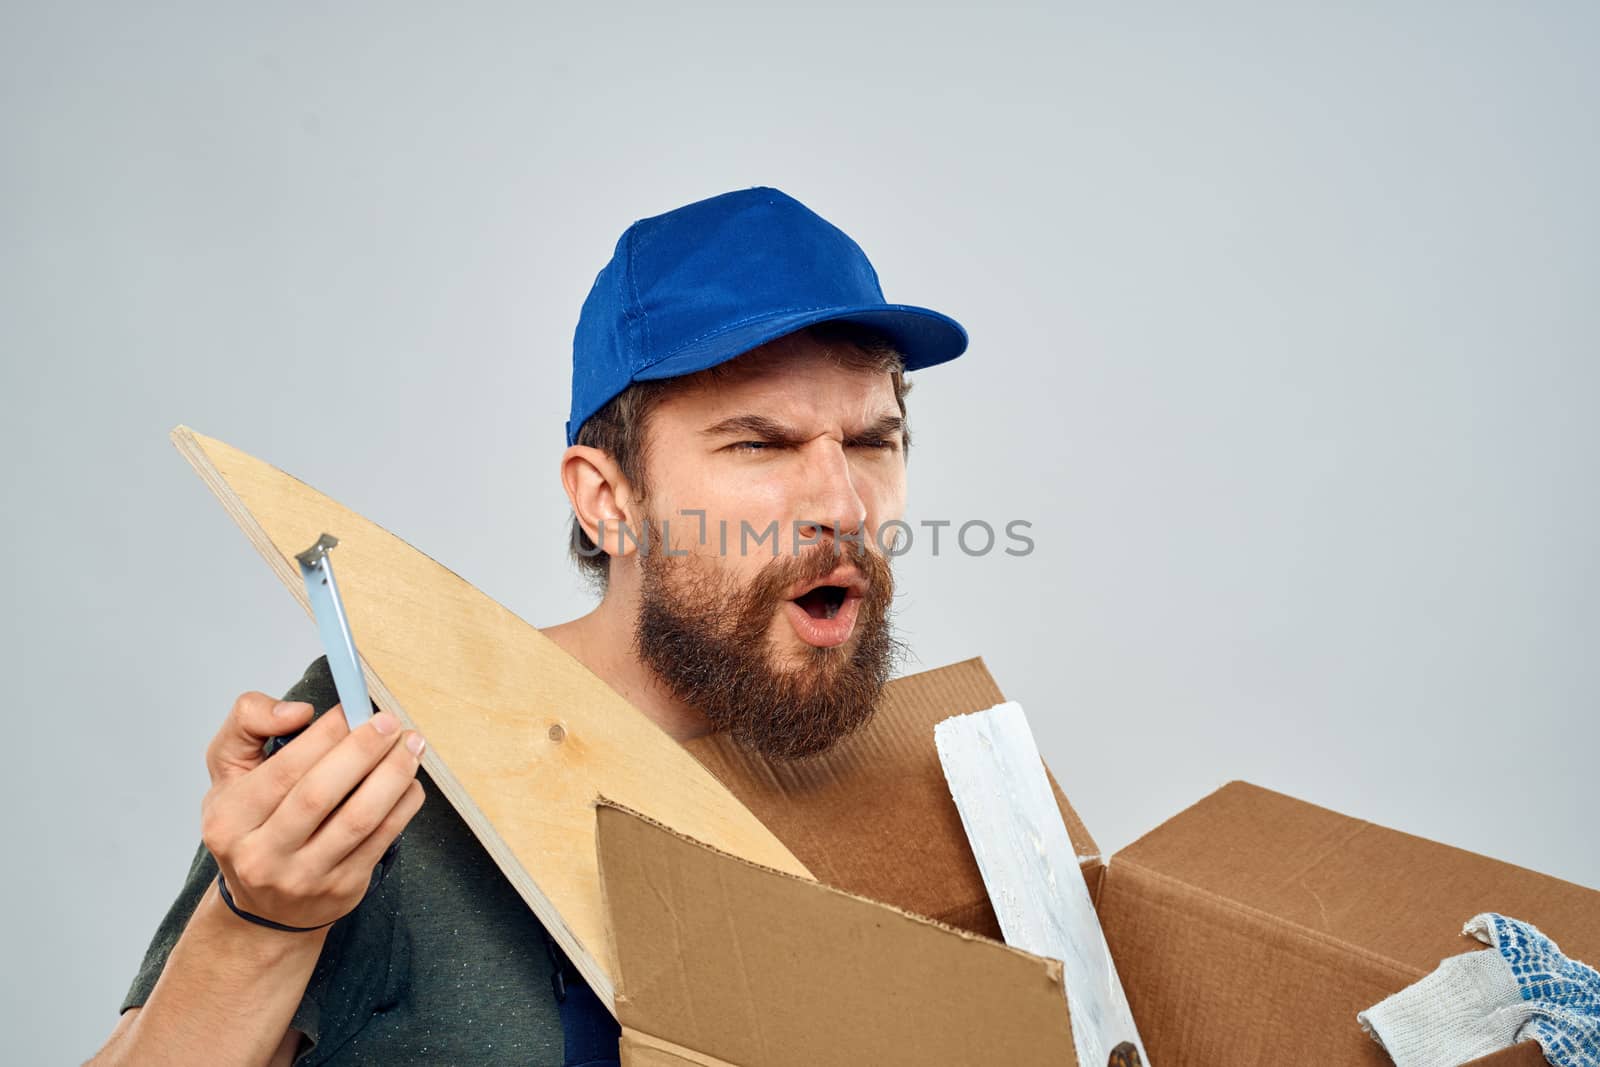 man in work uniform with box in hands tools lifestyle light background. High quality photo